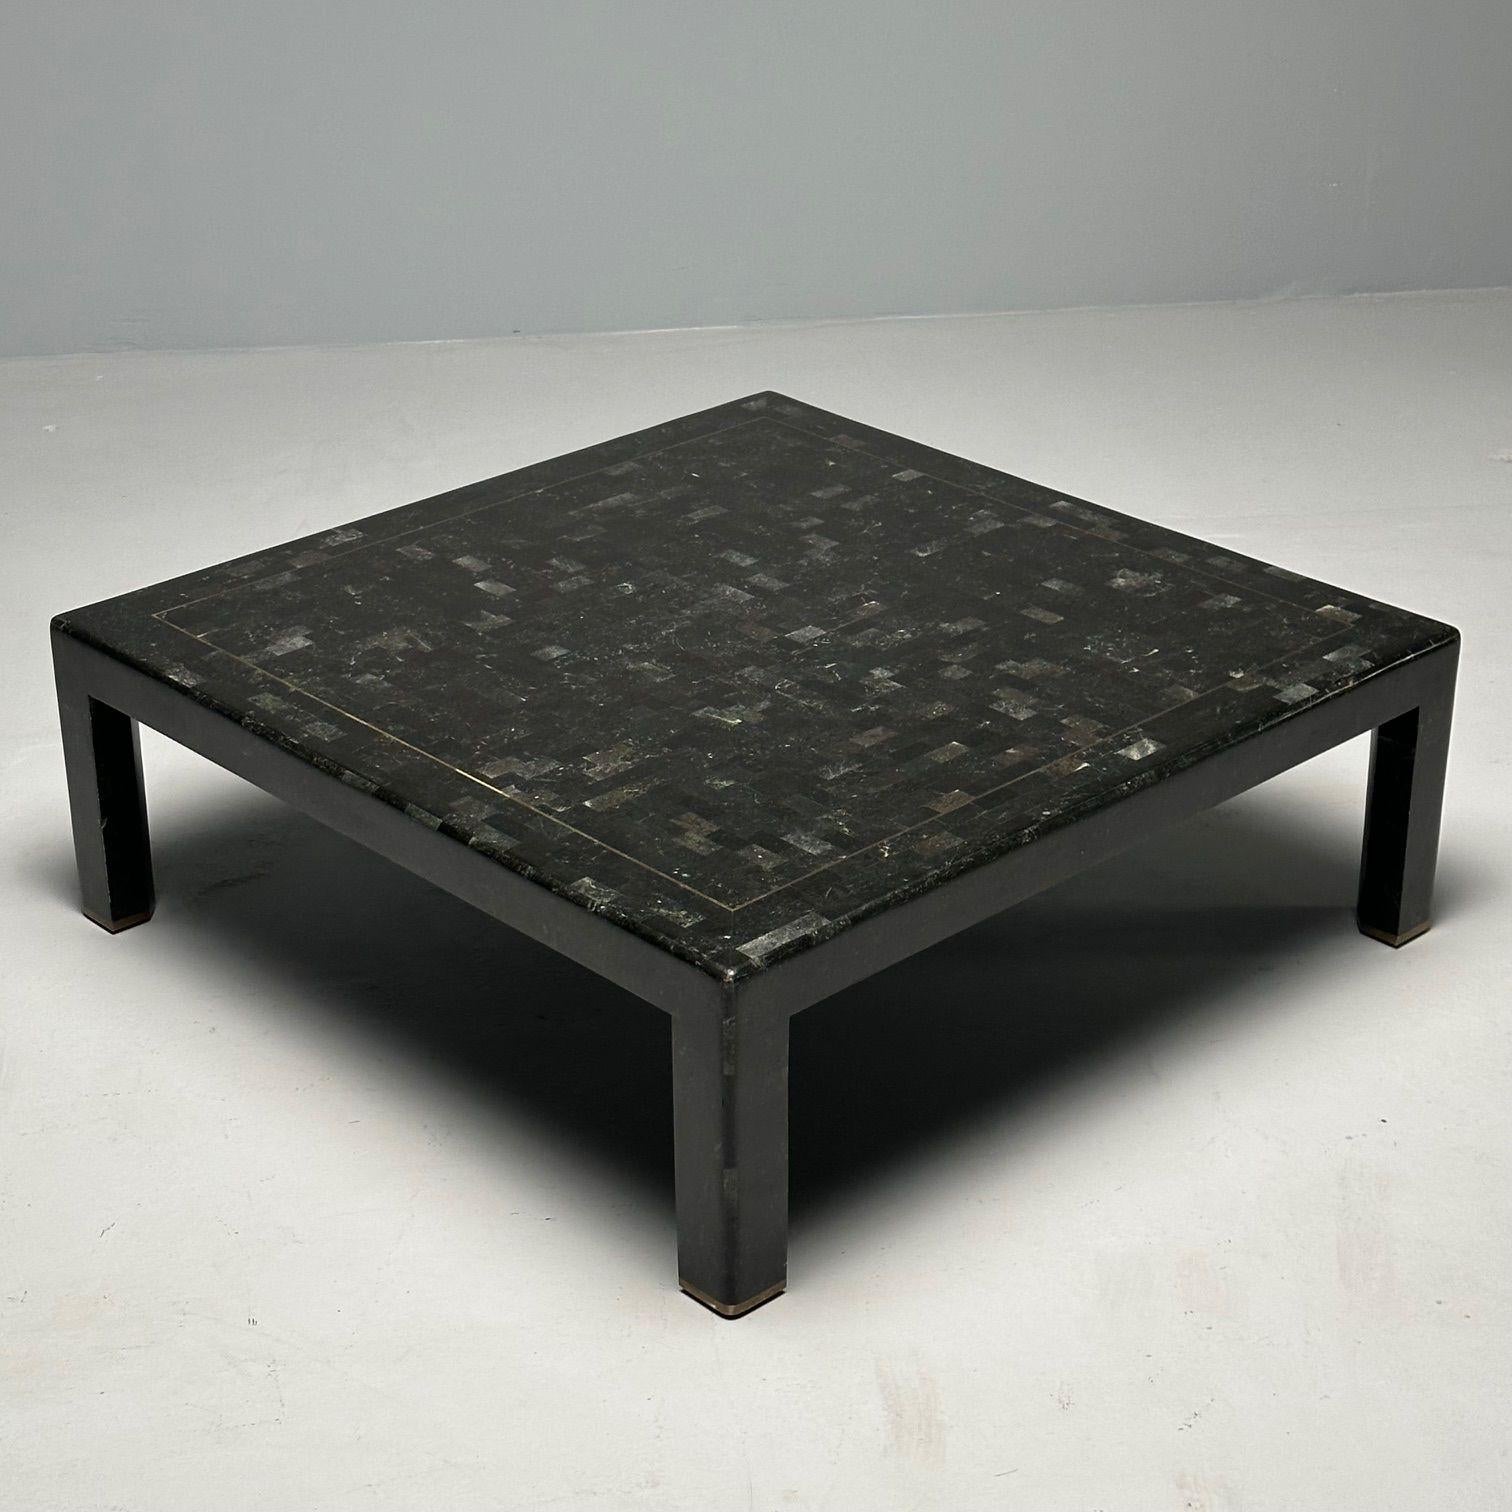 Karl Springer, Mid-Century Modern, Square Coffee Table, Tessellated Stone, Brass

Mid-century coffee table designed by renowned American designer, Karl Springer. This work is comprised of a tessellated stone clad wood. The square top is supported by